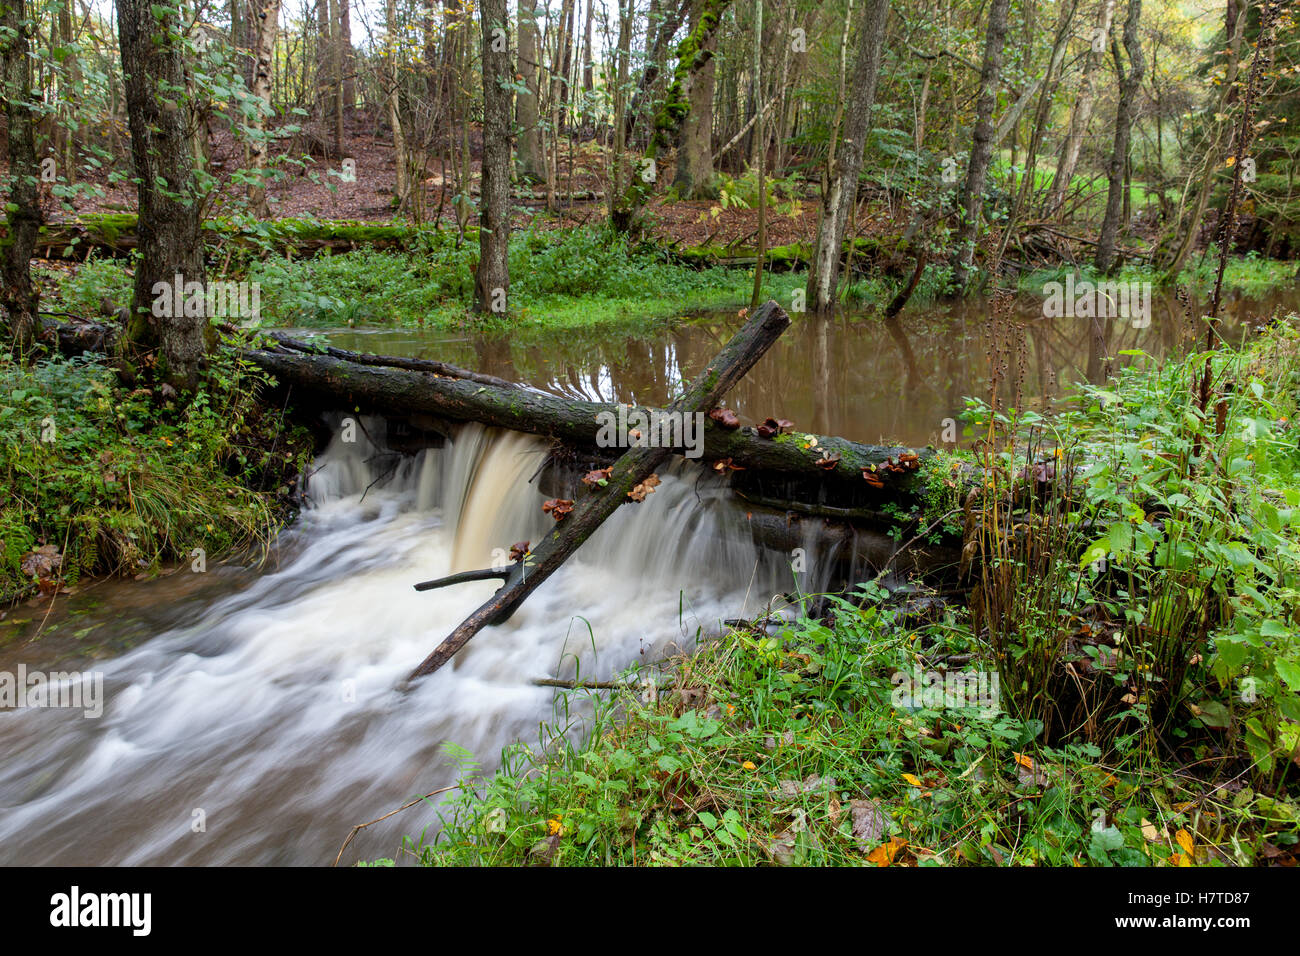 Woody Debris Dams for Natural Flood Risk Reduction, Pickering, England Stock Photo